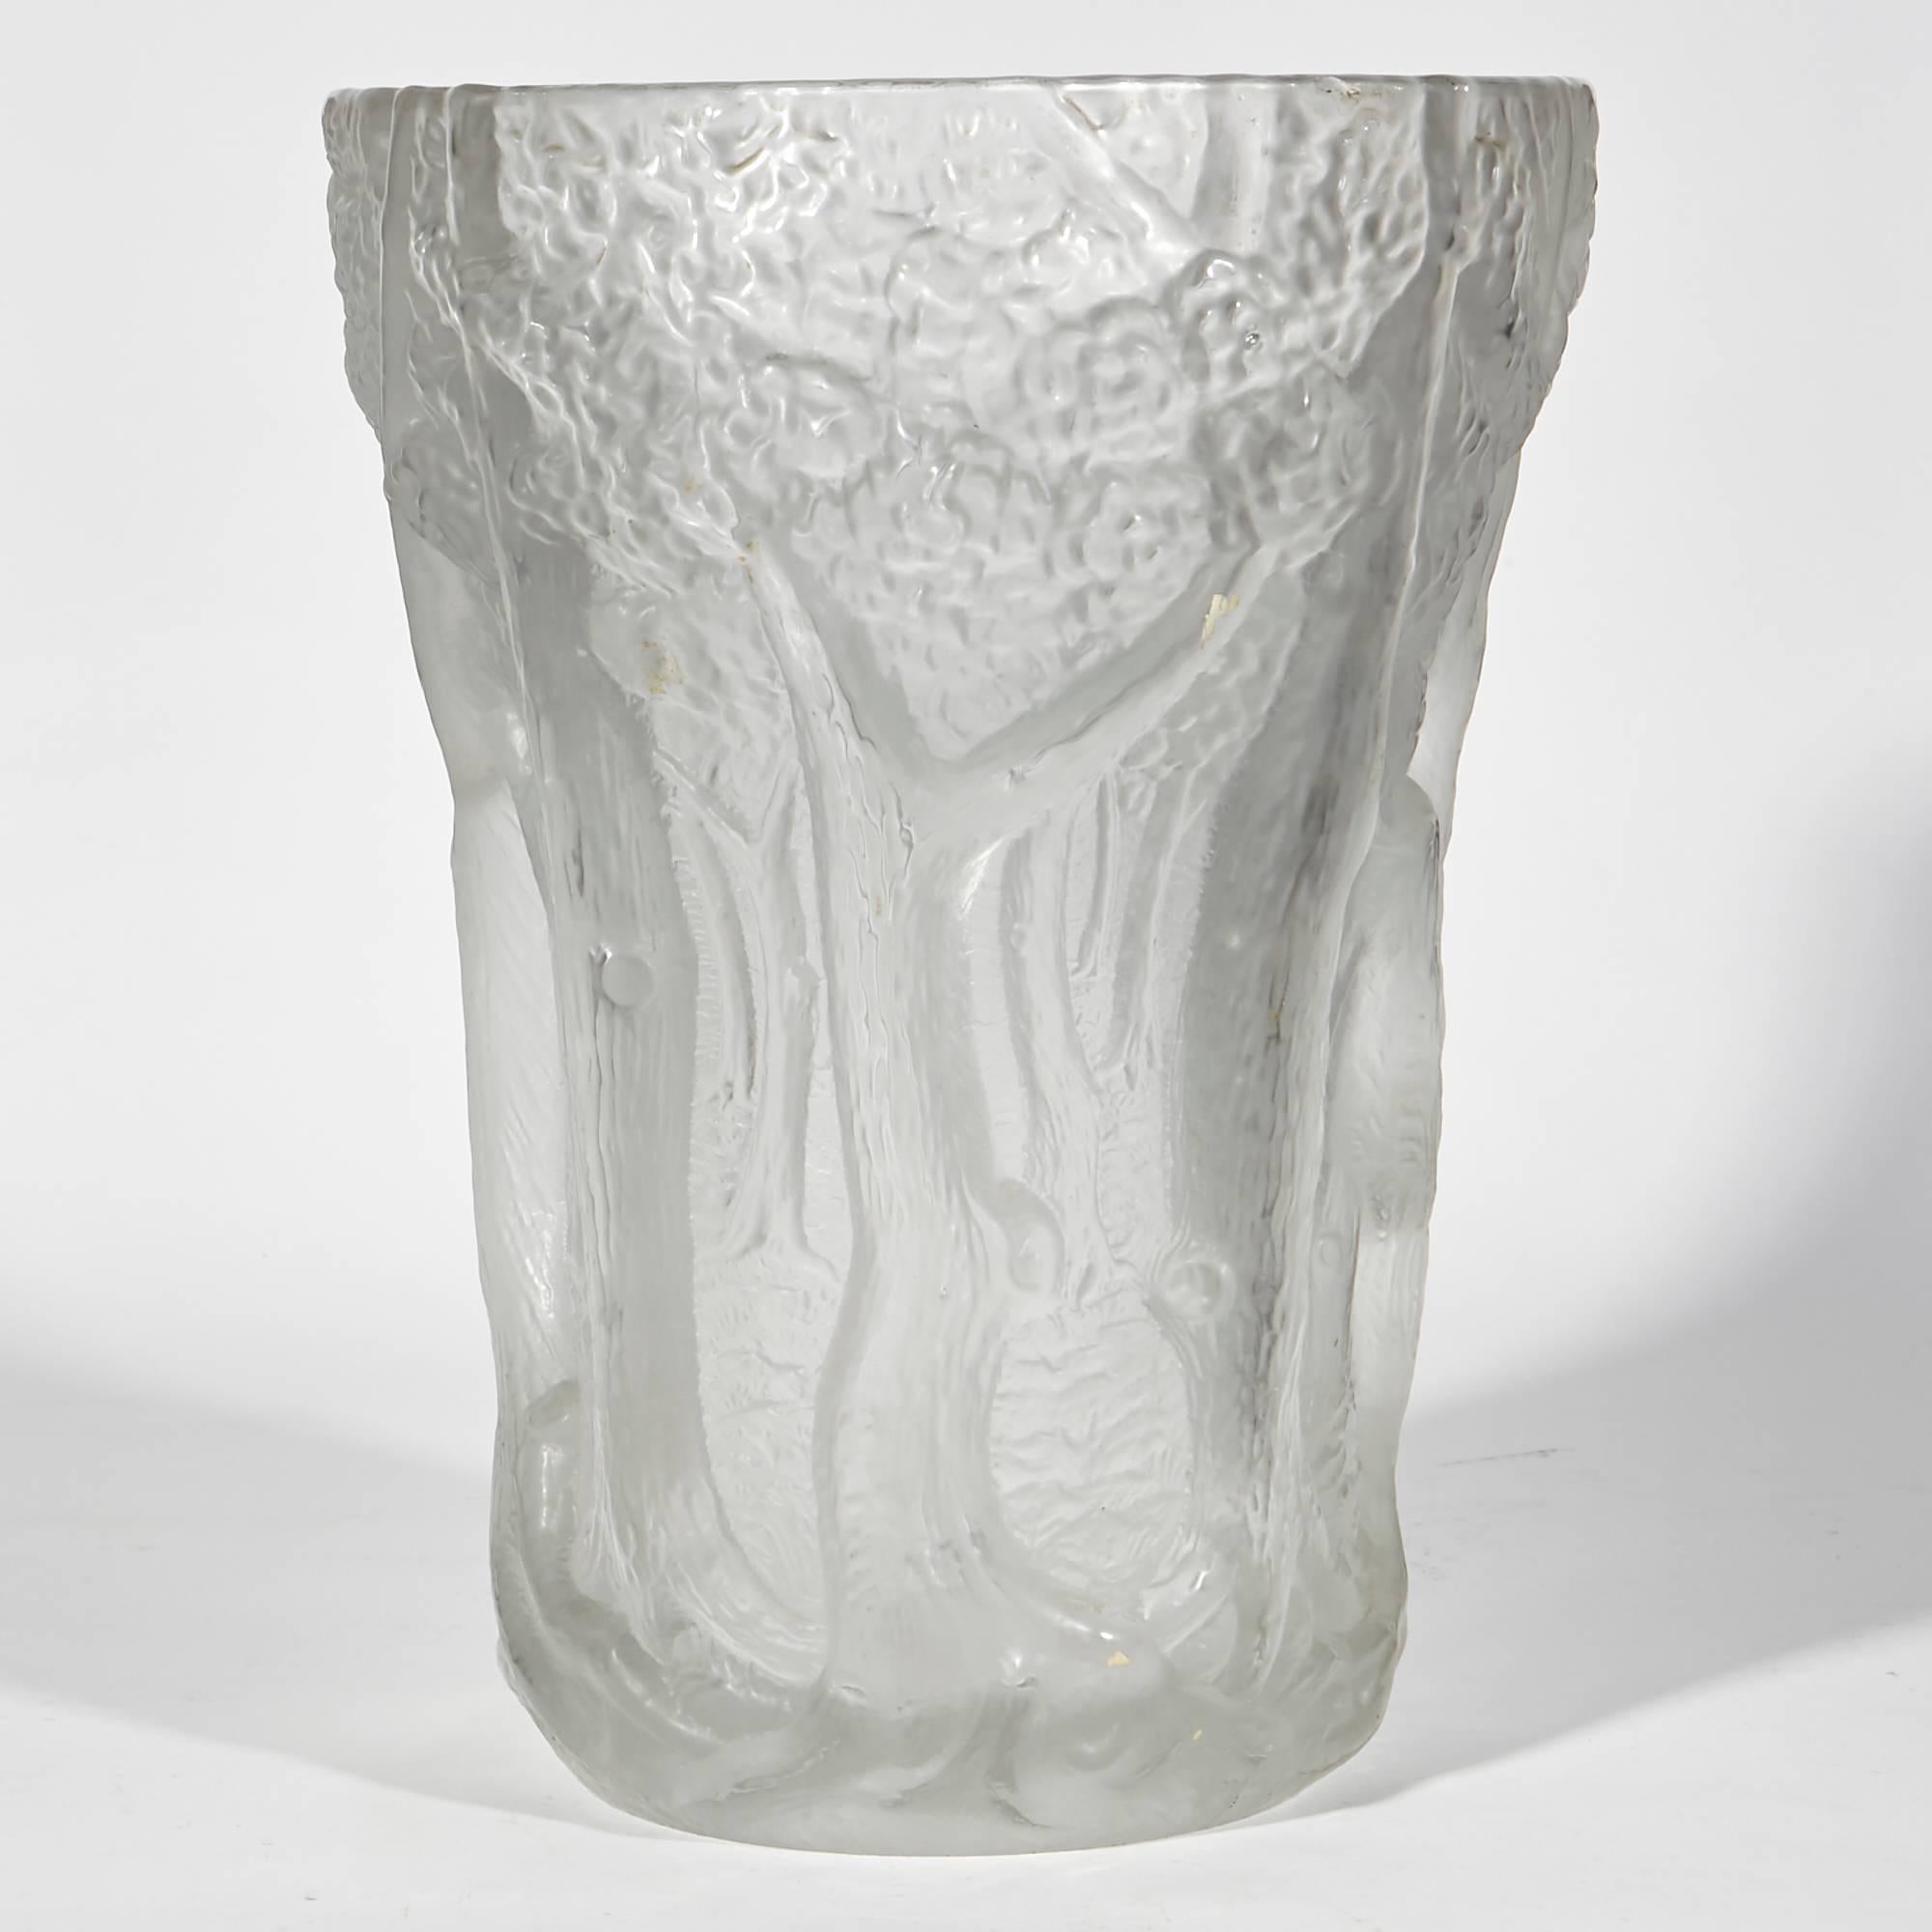 1930s Czechoslovakian handblown Josef Inwald Art Deco frosted glass Barolac forest vase. Barolac was a line of frosted wares made by Inwald for retailer John Jenkins & Son of London. Unmarked.